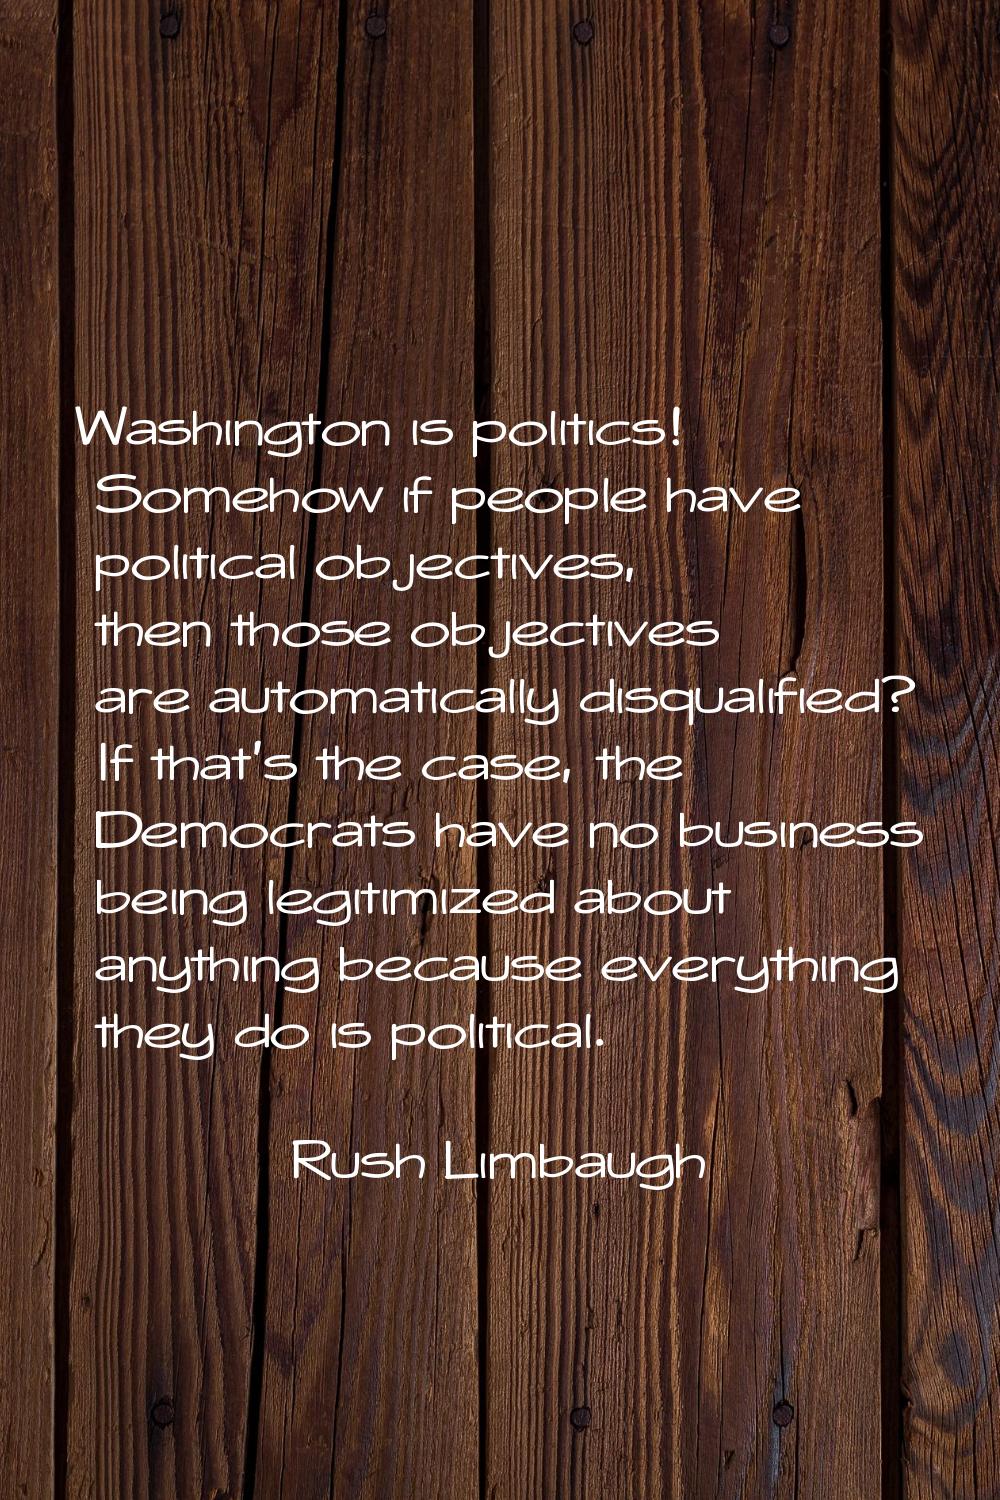 Washington is politics! Somehow if people have political objectives, then those objectives are auto